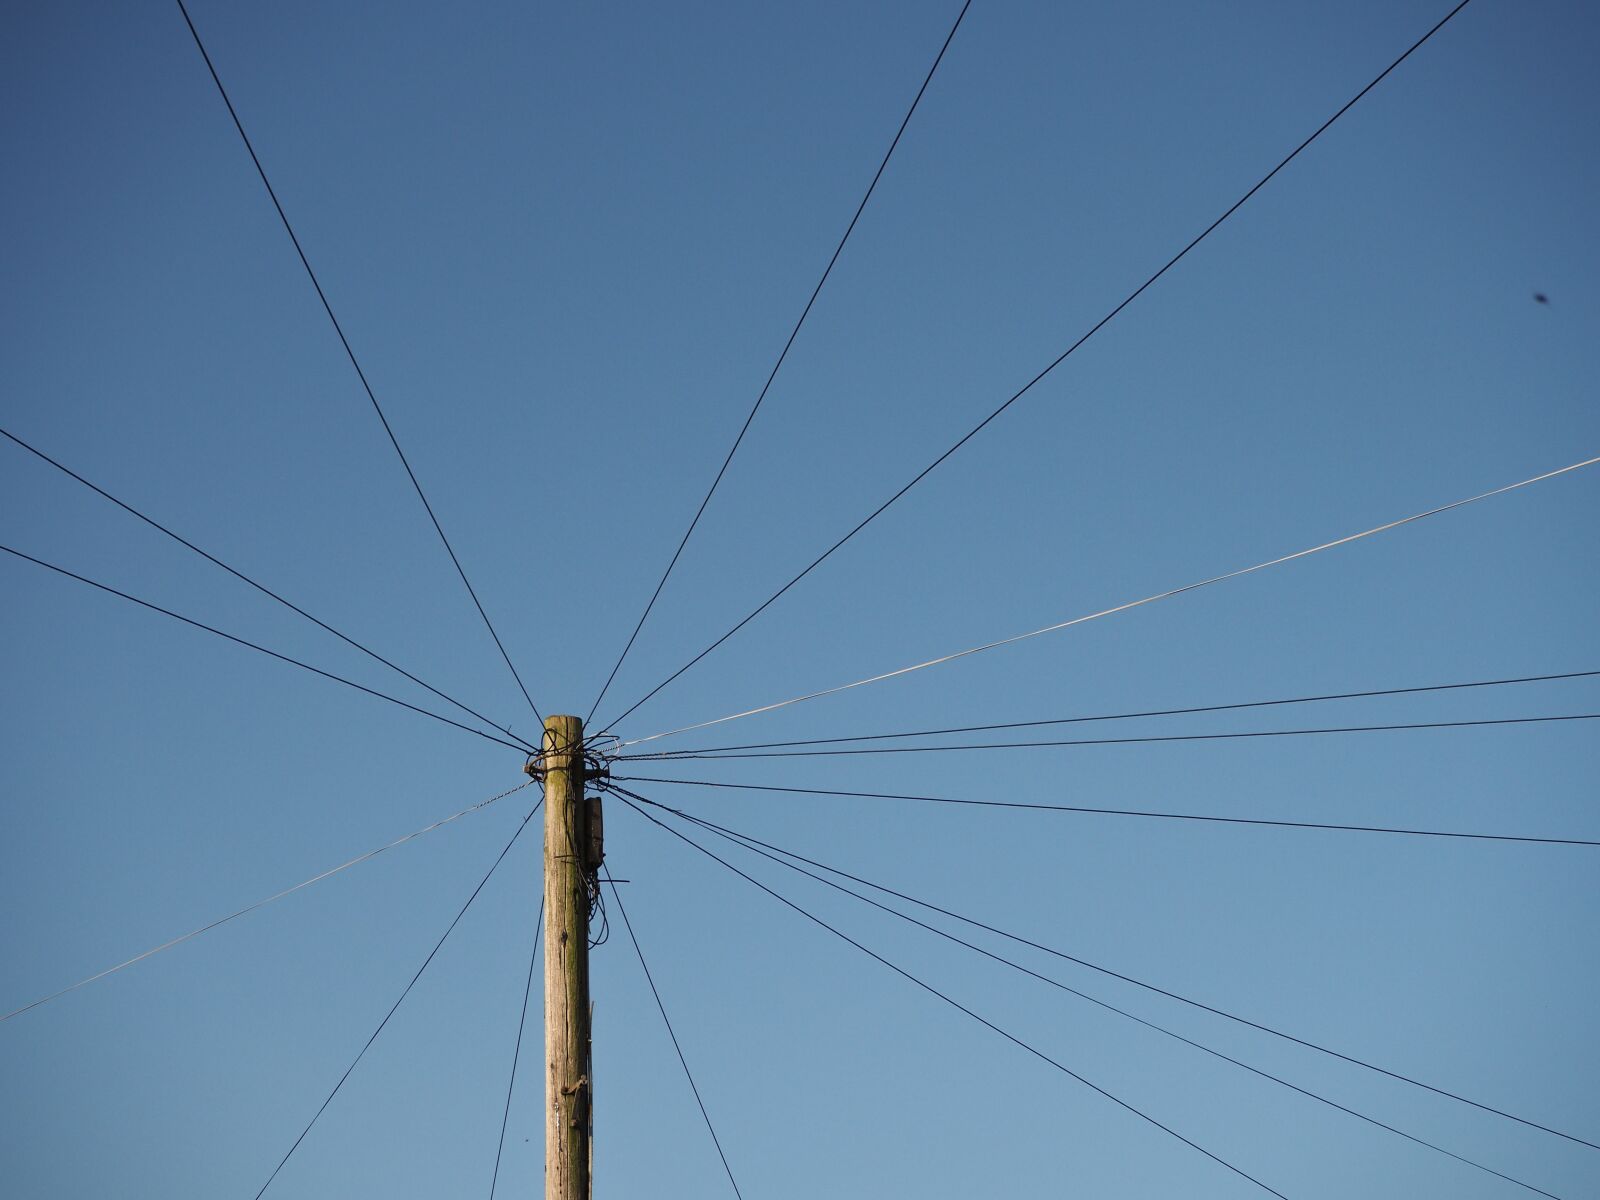 Olympus OM-D E-M10 II sample photo. Cables, pole, sky photography